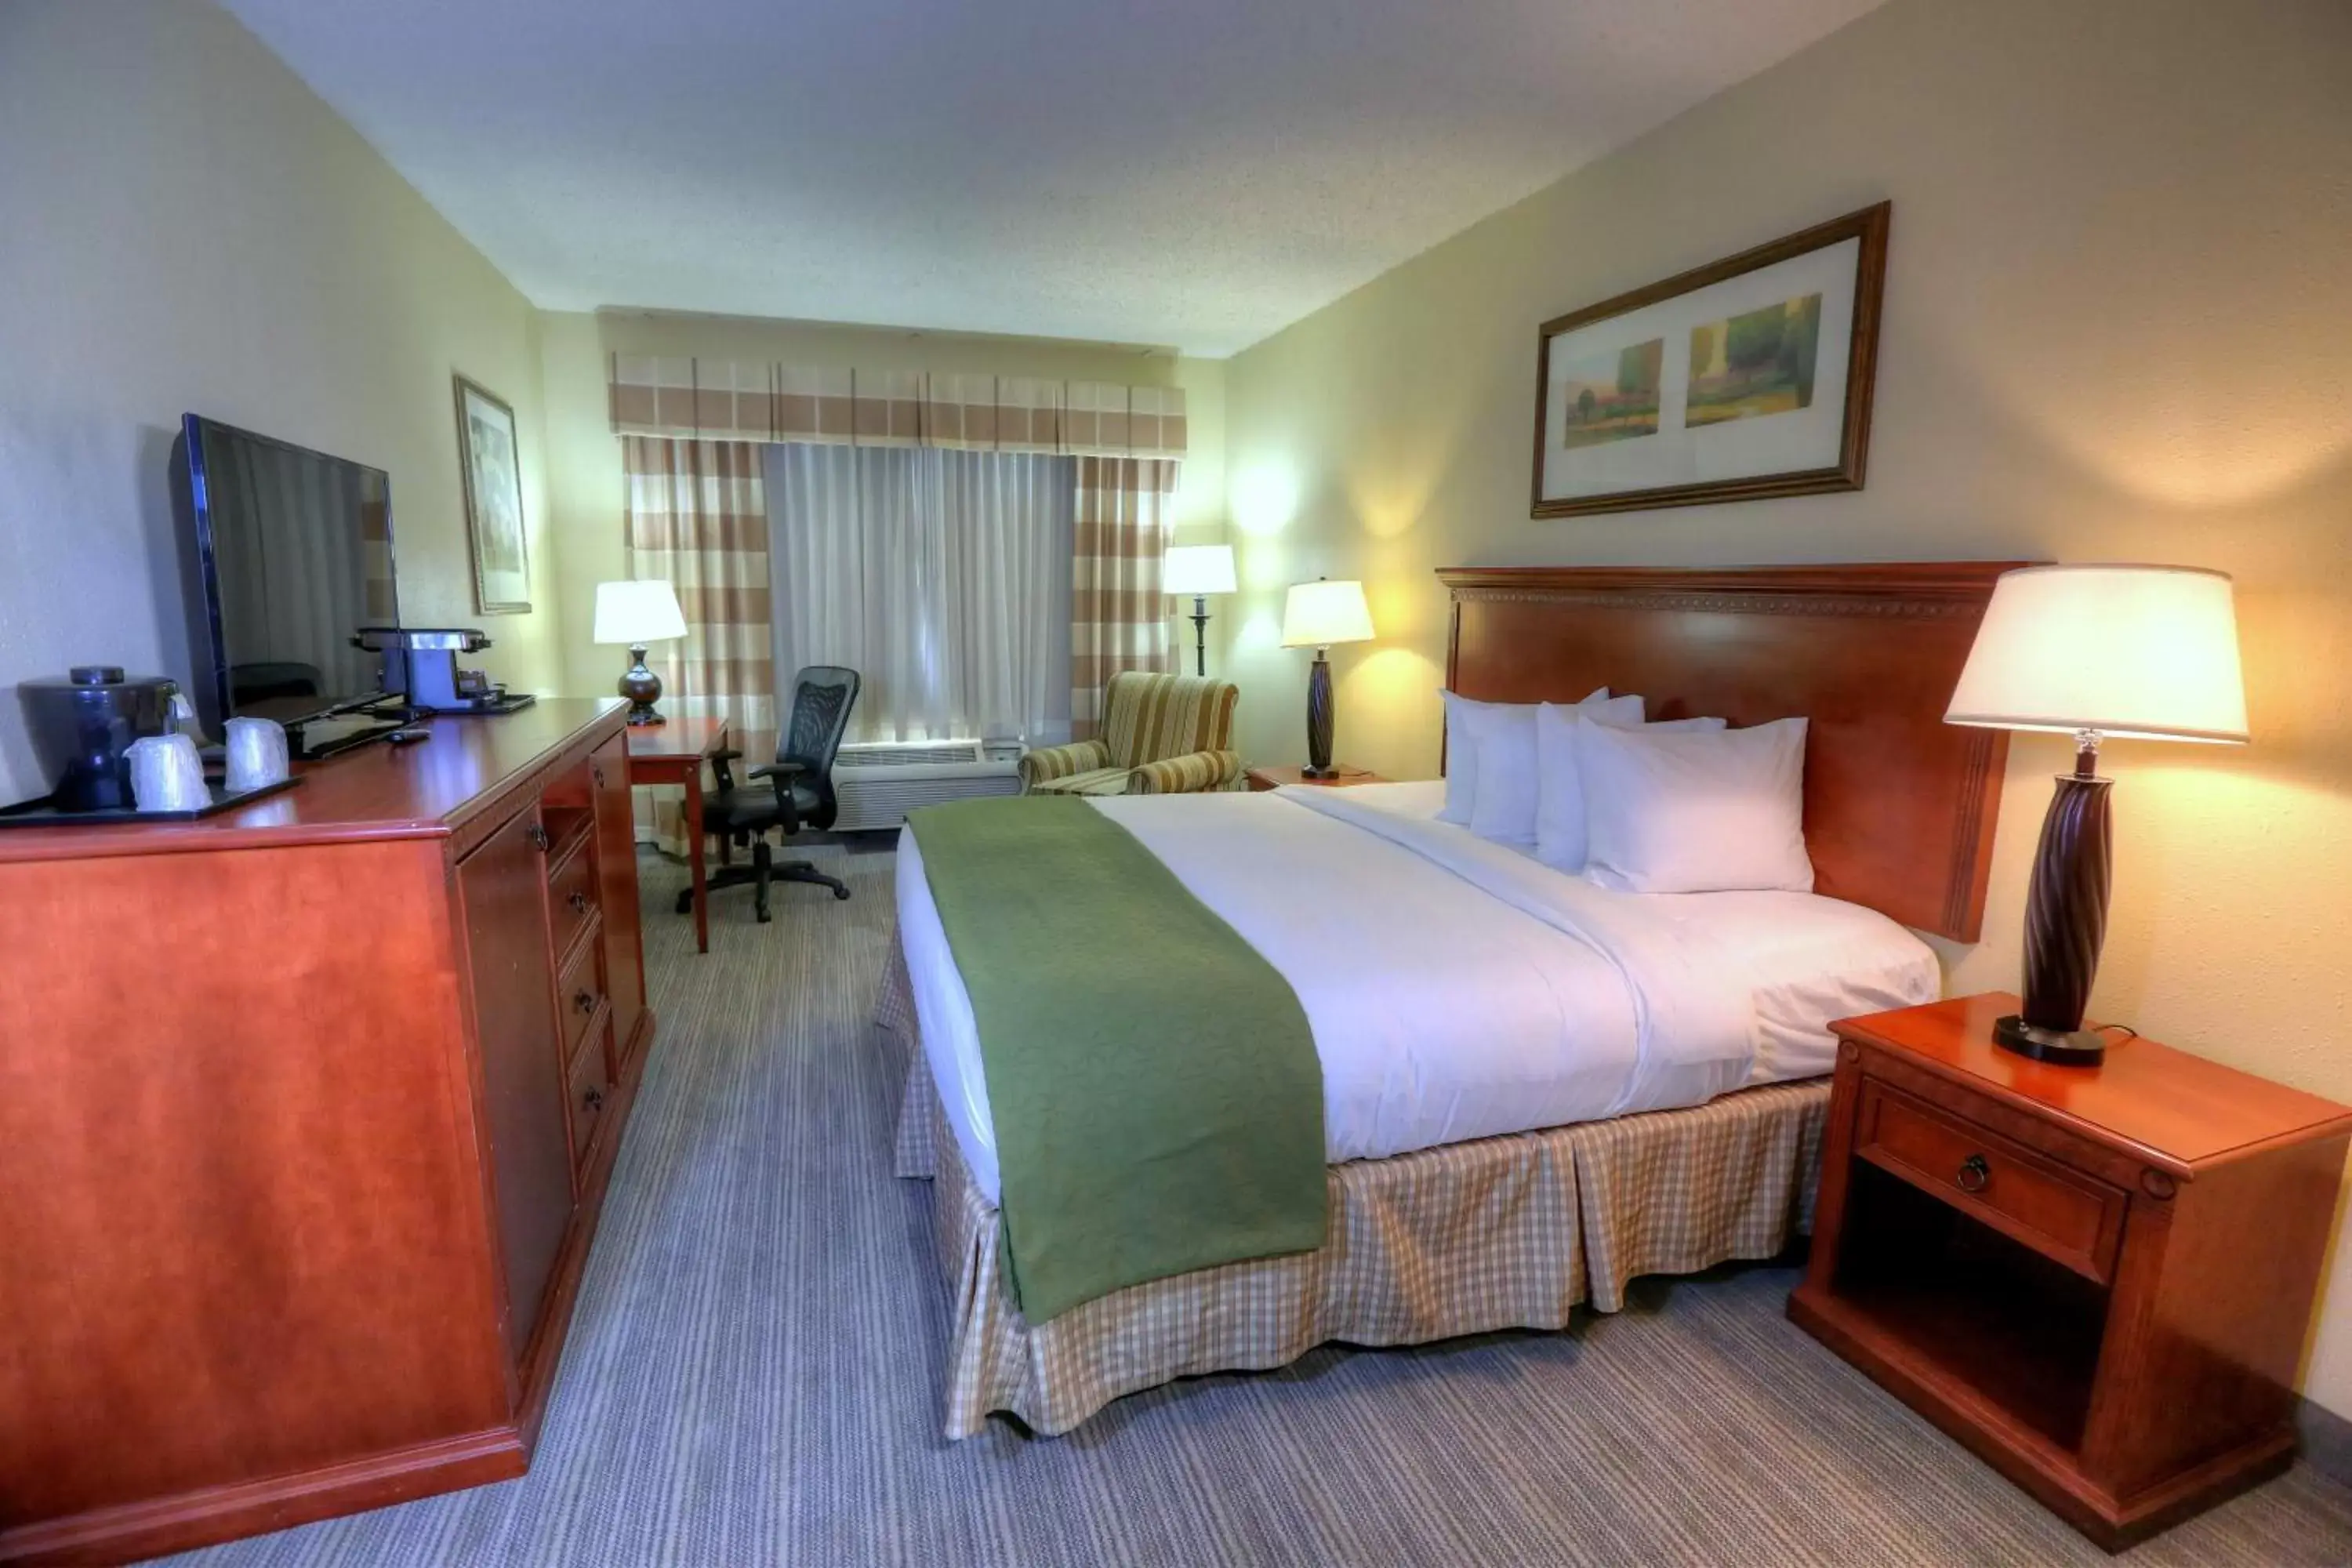 King Room - Non-Smoking in Country Inn & Suites by Radisson, Charlotte I-85 Airport, NC